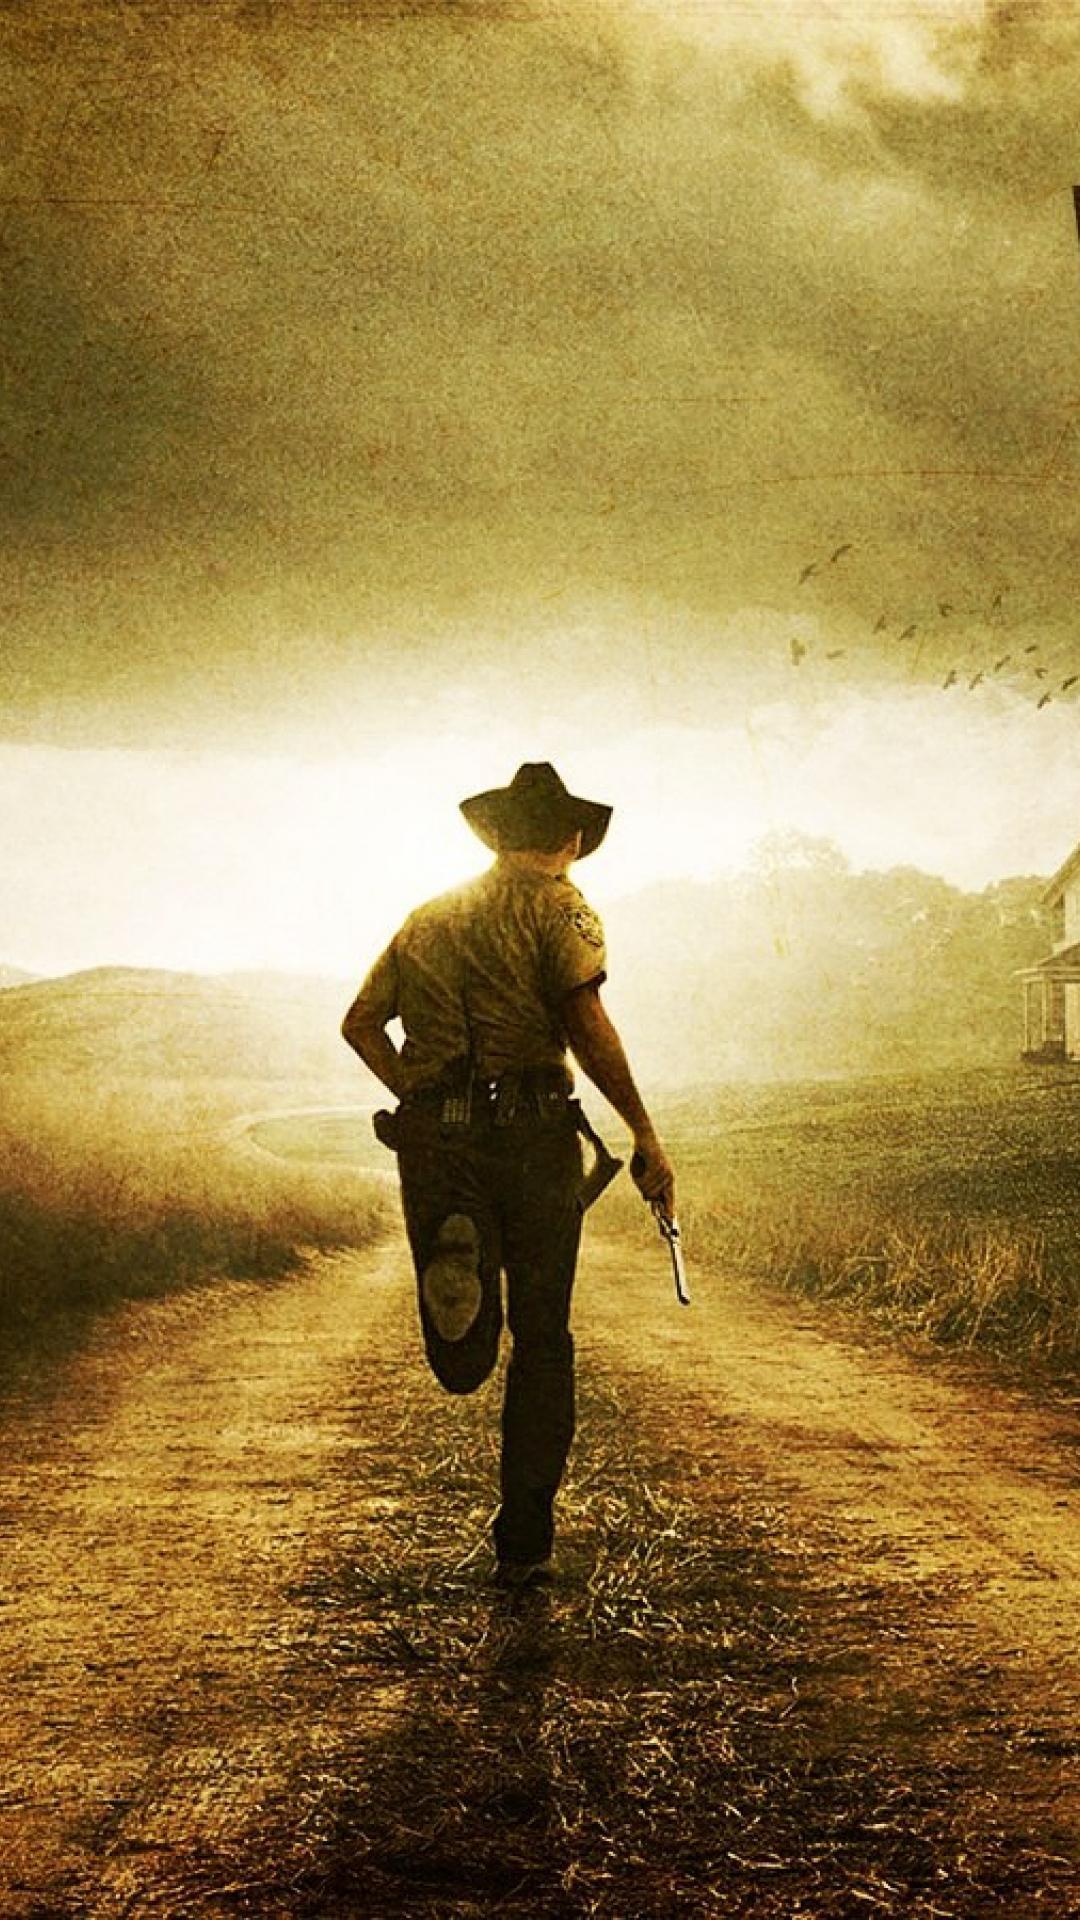 The Walking Dead wallpaper for iPhone and iPad